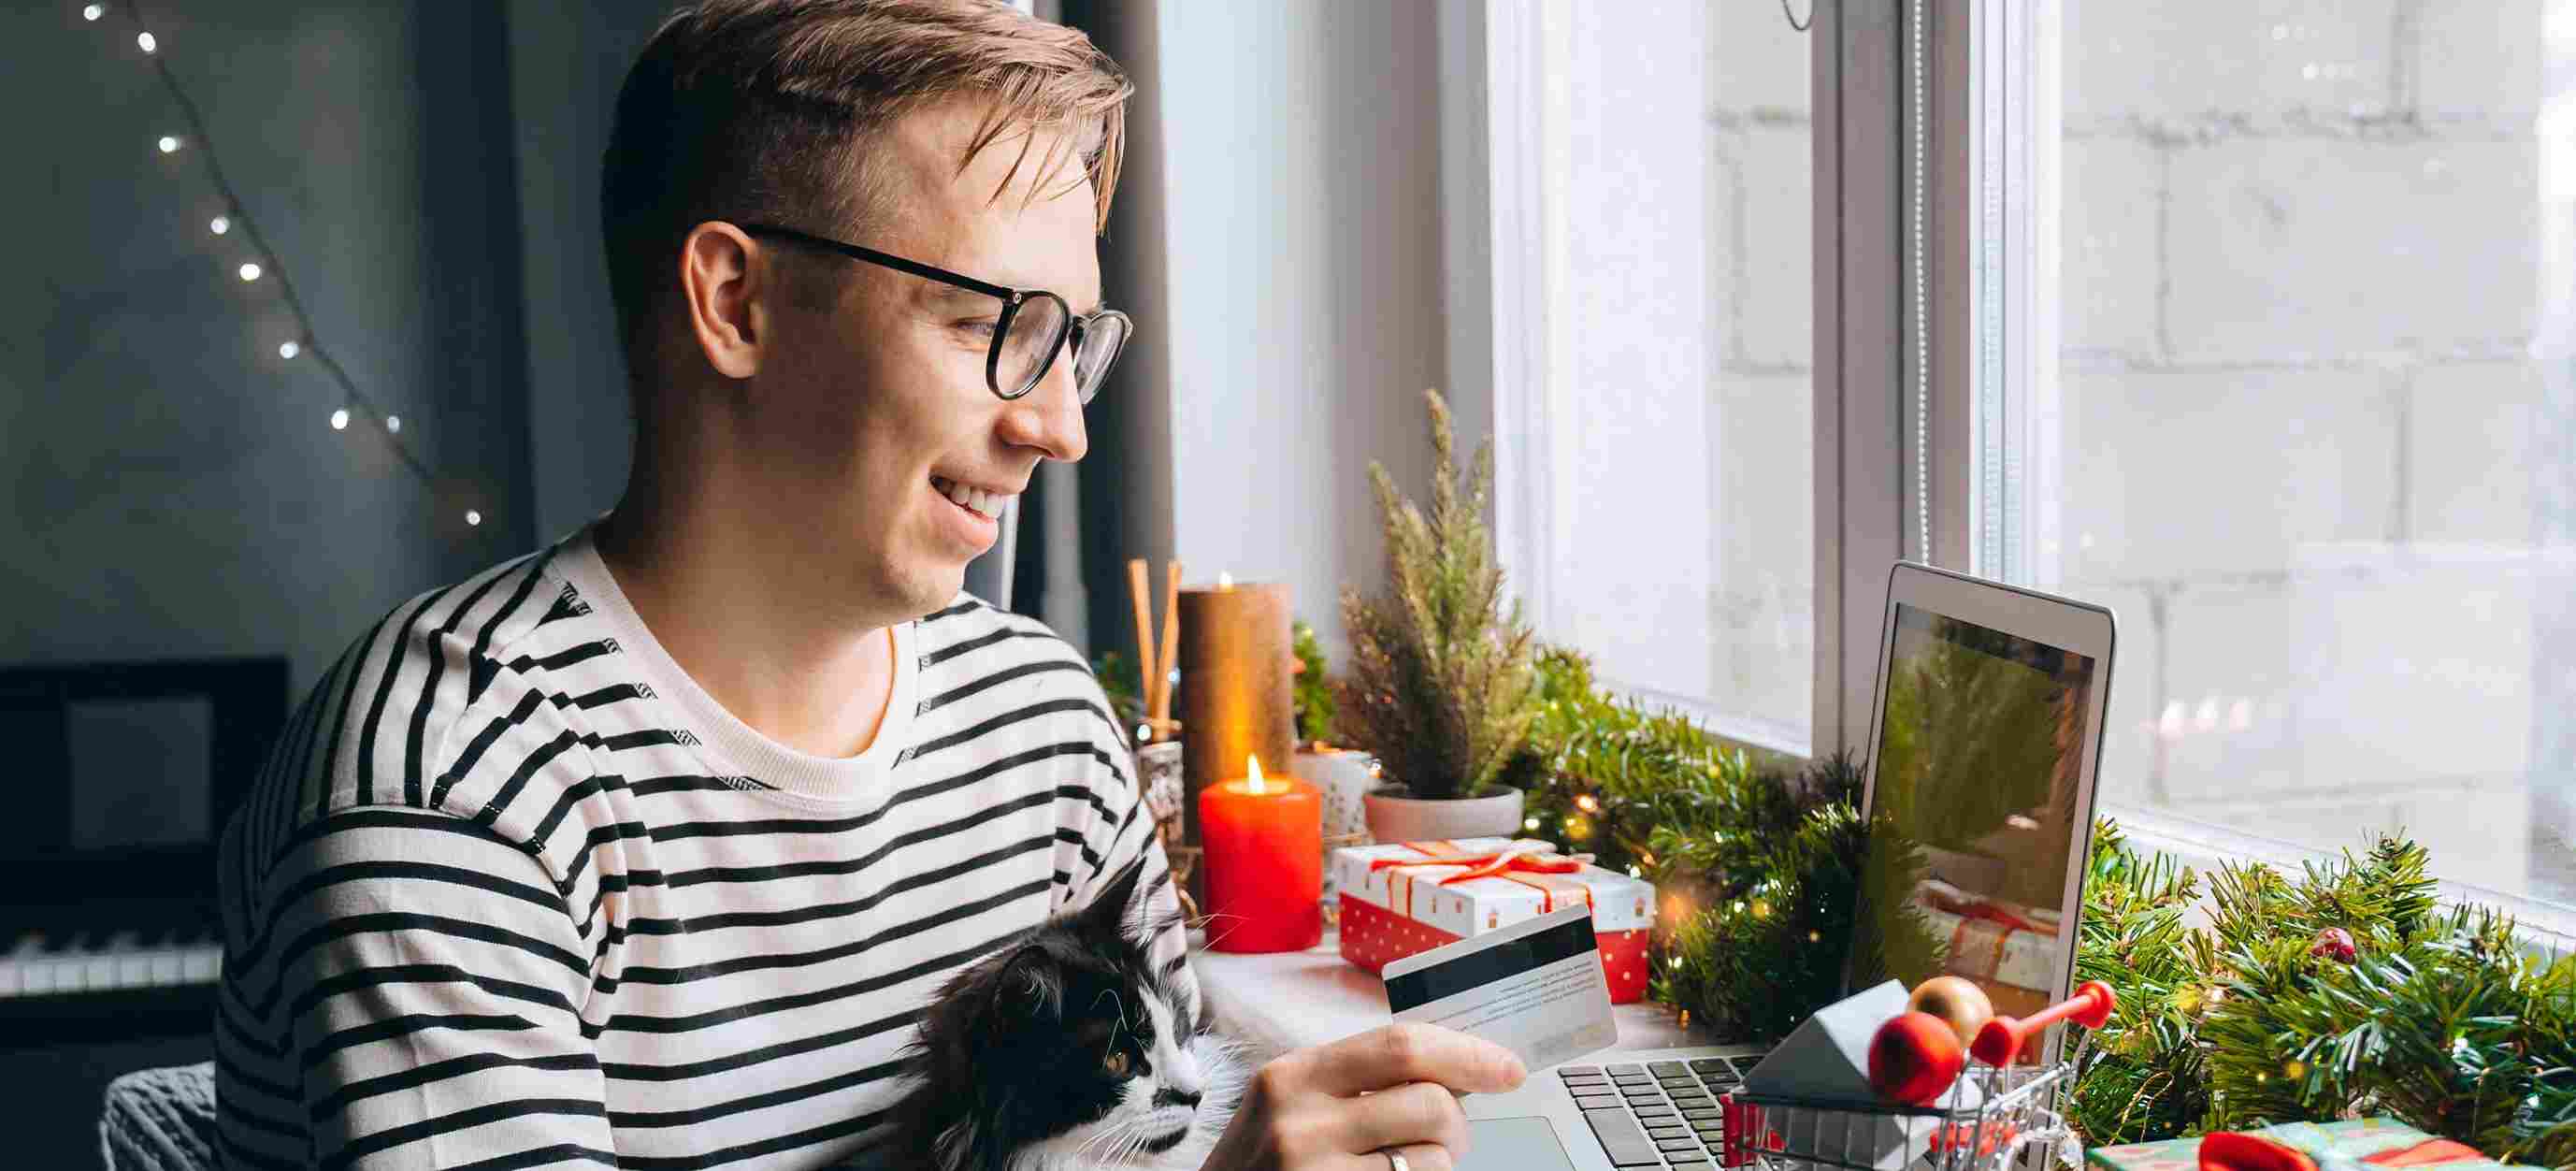 Man with cat online shopping with credit card at Christmas time